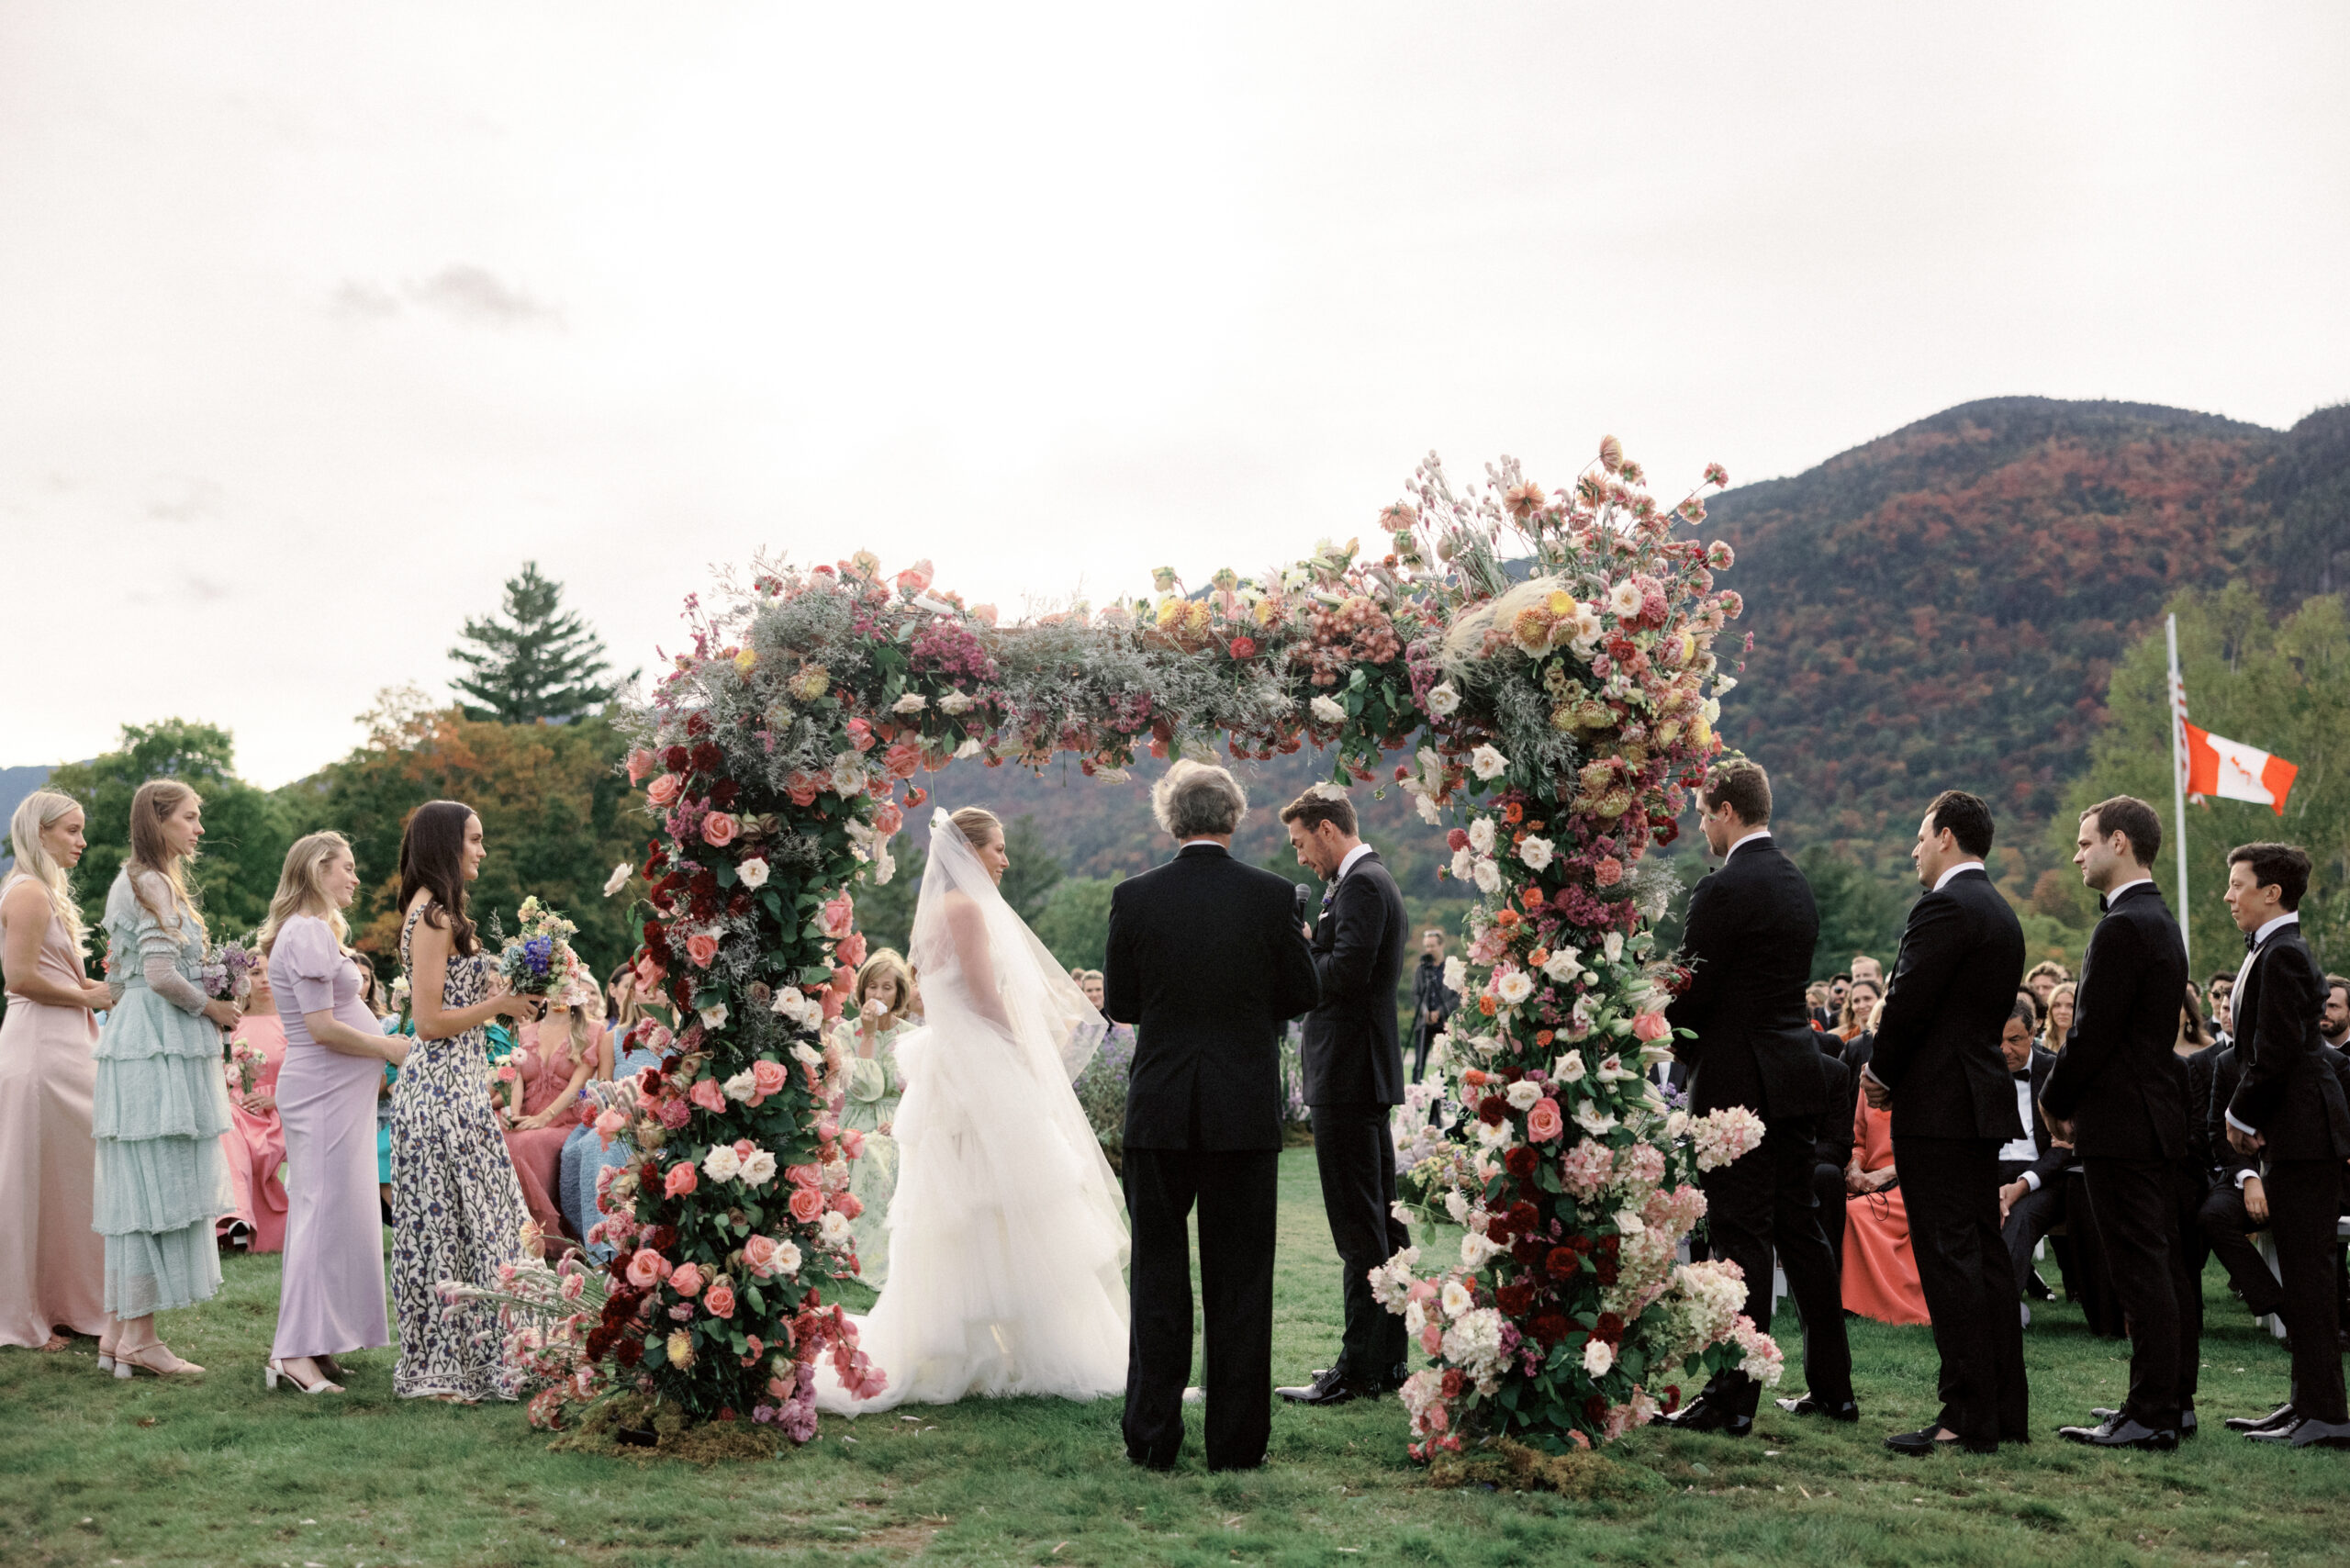 Editorial image of the wedding ceremony at The Ausable Club, NY. Upstate New York luxury wedding image by Jenny Fu Studio.